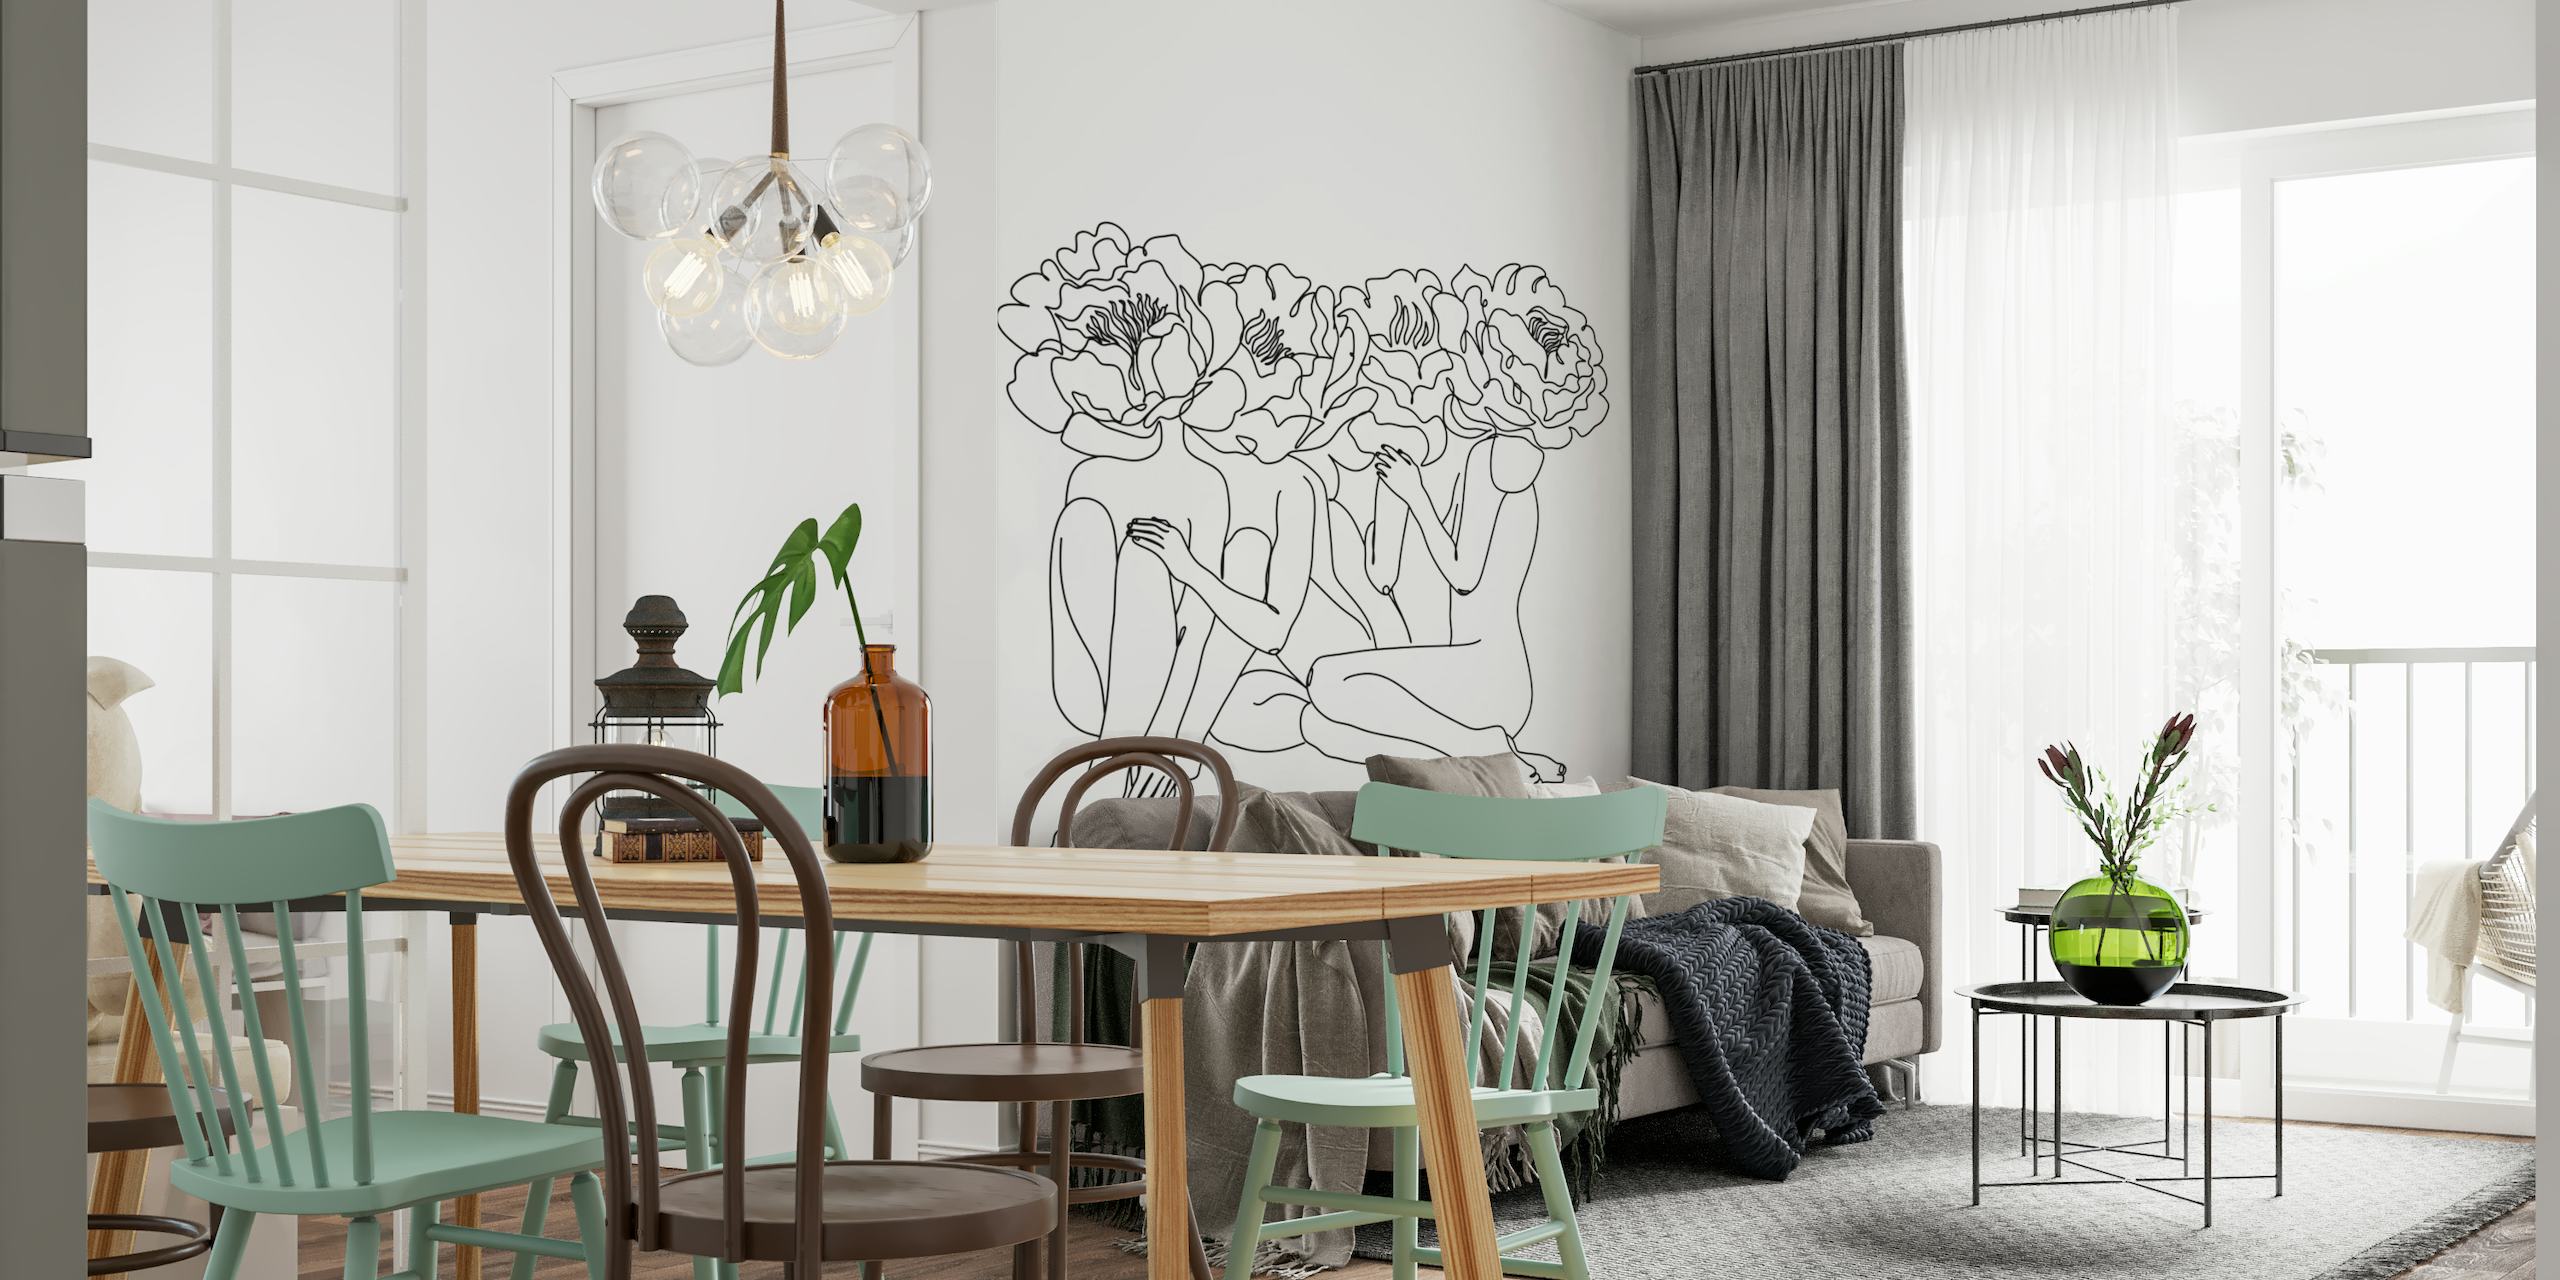 Minimalist line art wall mural of women with rose motifs from Happywall